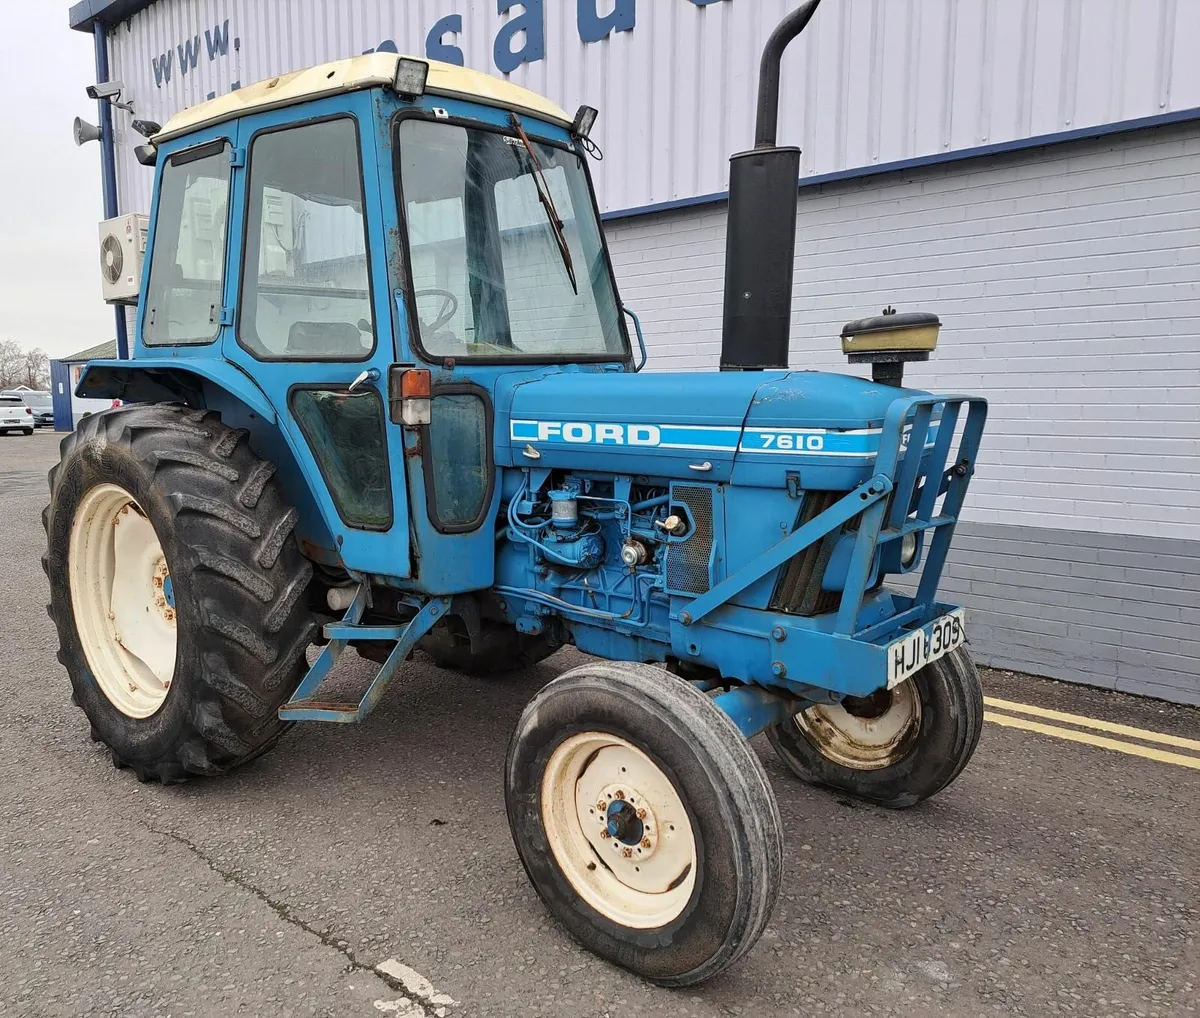 Ford 7610 2wd Tractor for Auction